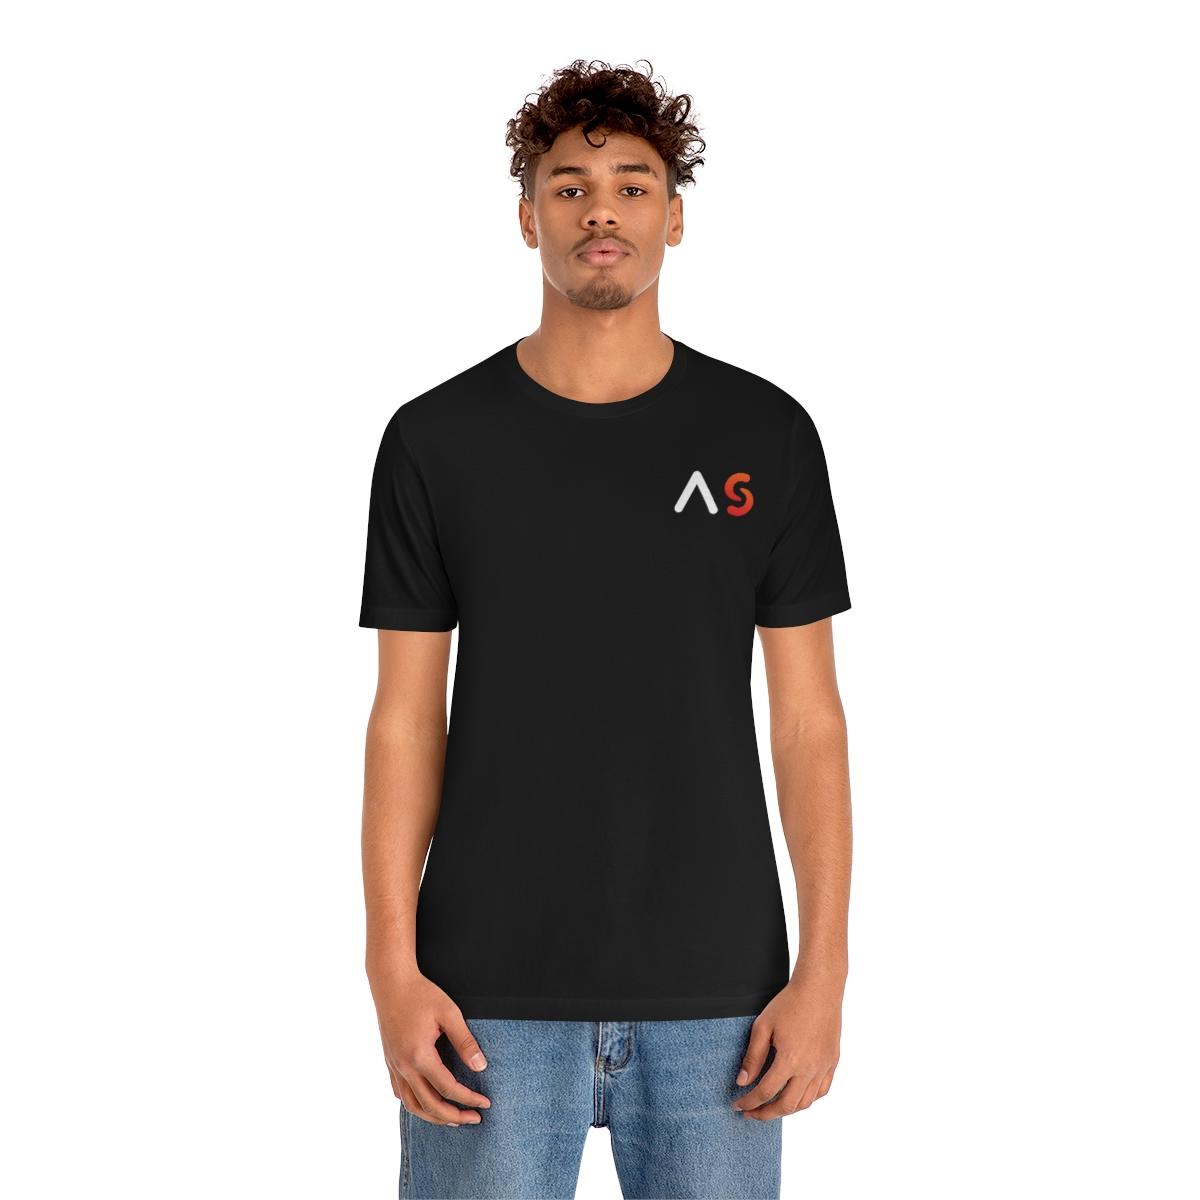 A young medium skin tone male model wearing a black t-shirt with stylized "AS" over the left breast denoting sickle cell trait status.